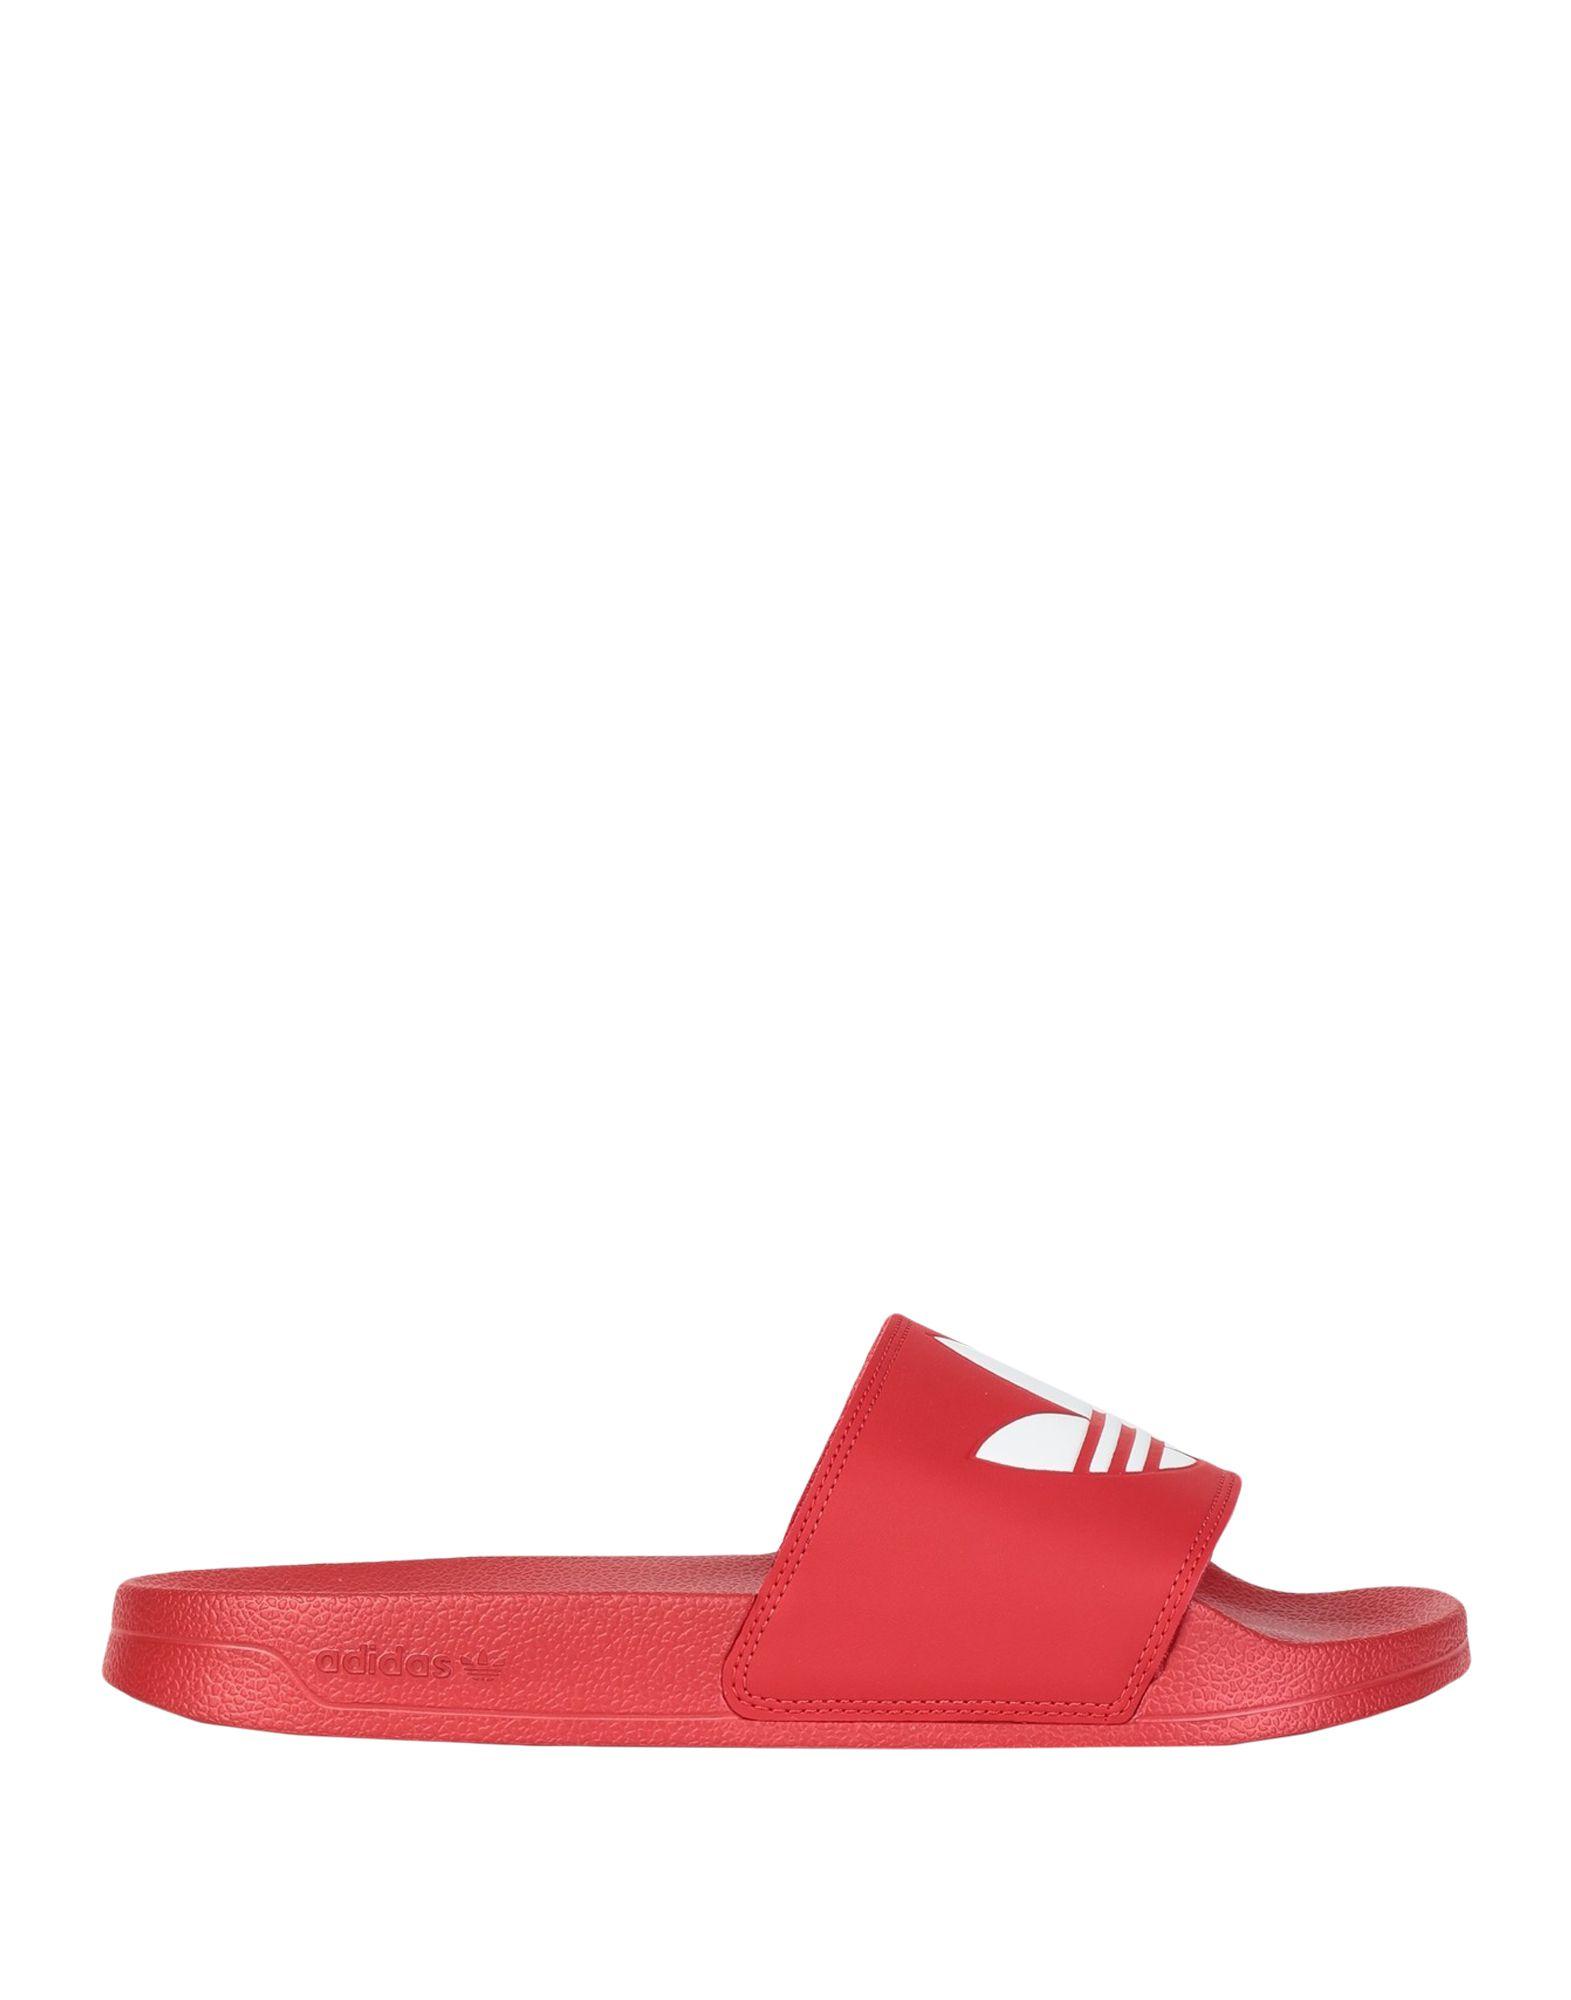 adidas Originals Synthetic Adilette Lite in Scarlet/White/Scarlet (Red) for  Men - Save 50% - Lyst